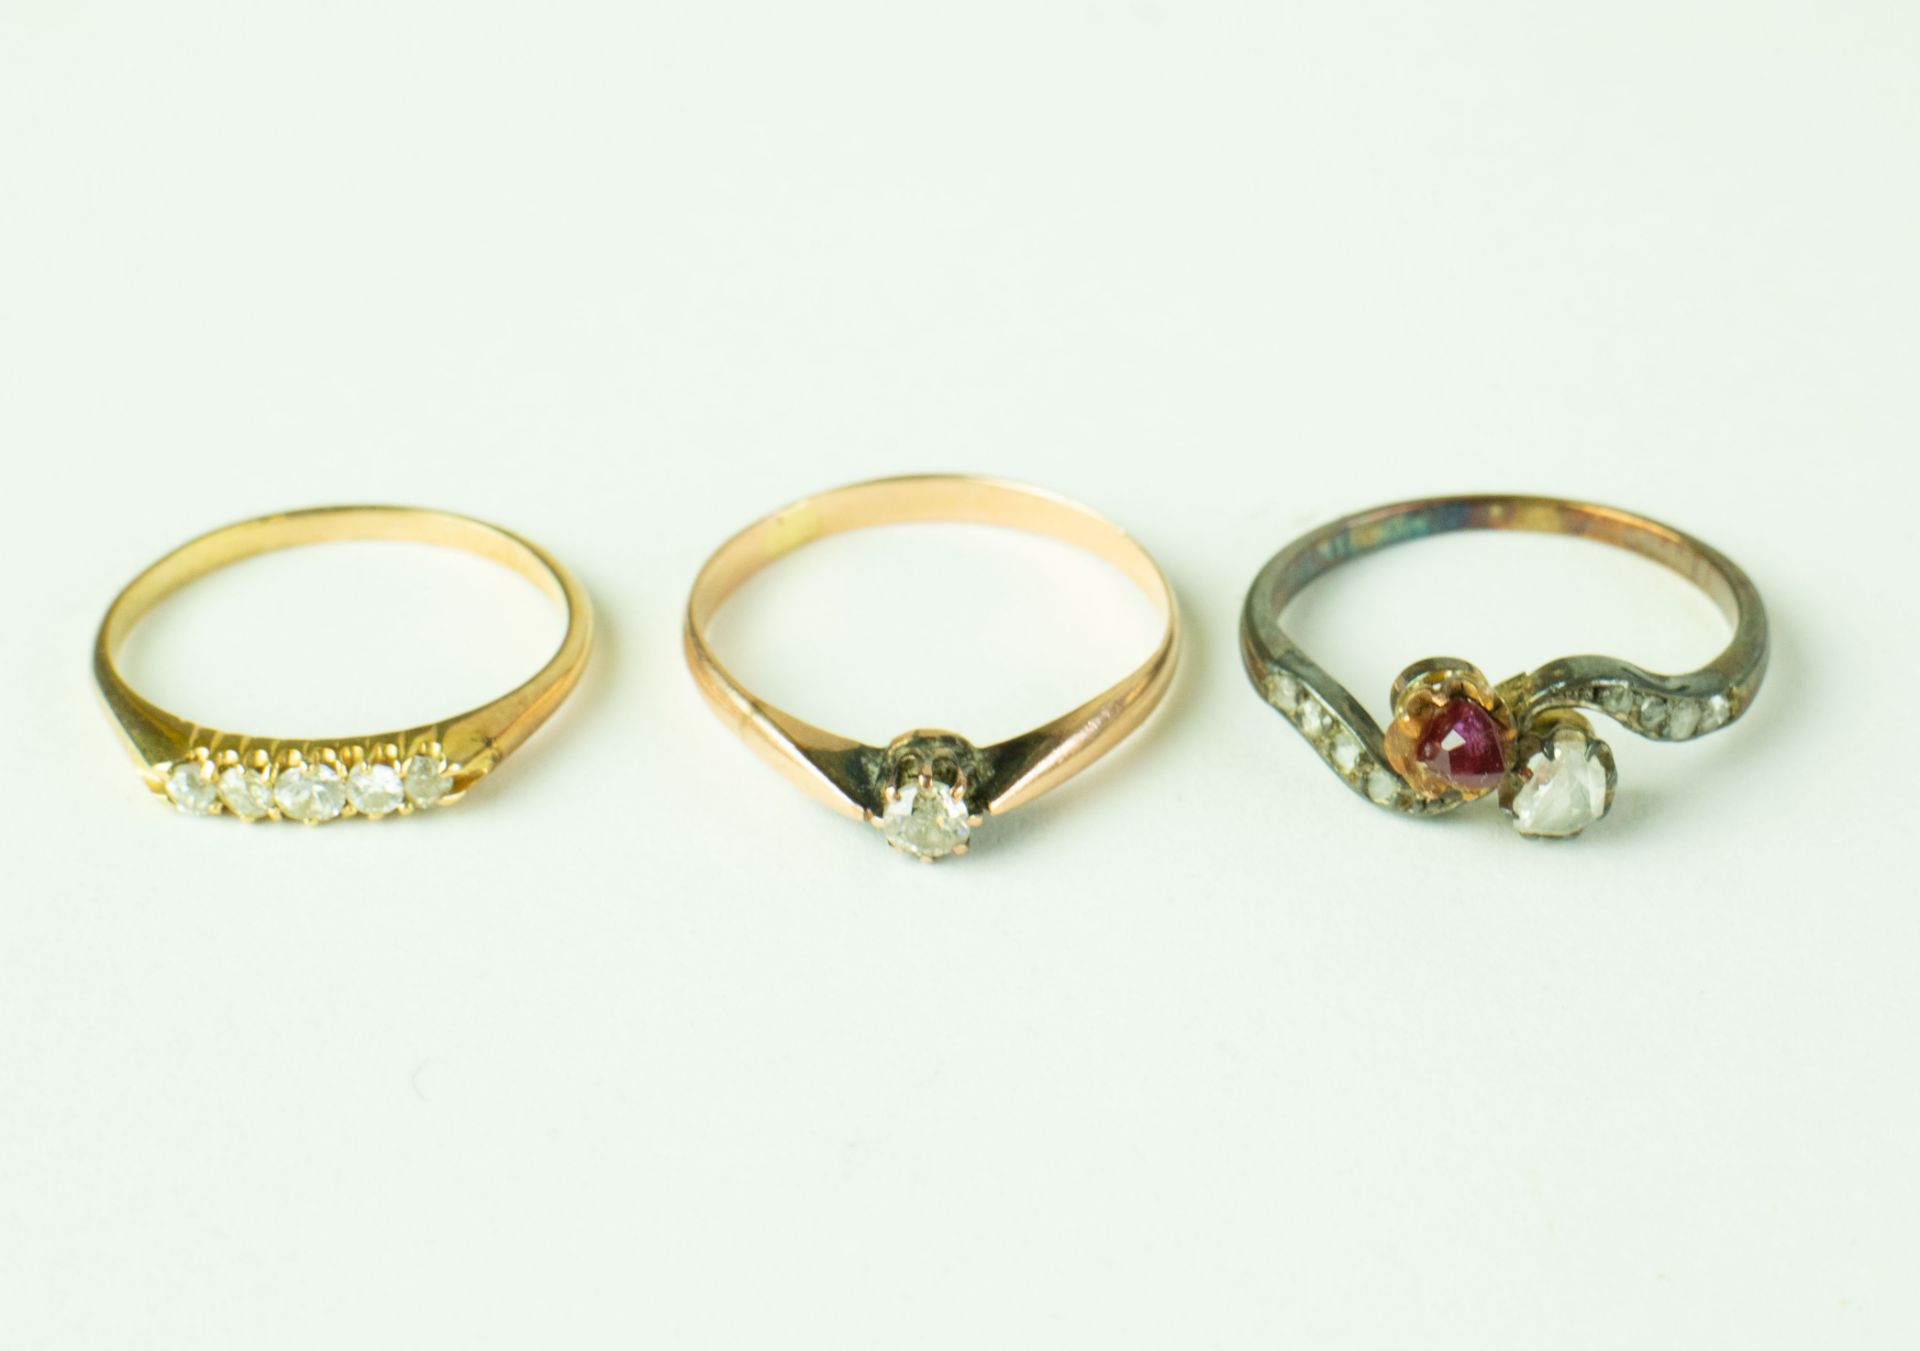 6 gold rings - Image 3 of 3